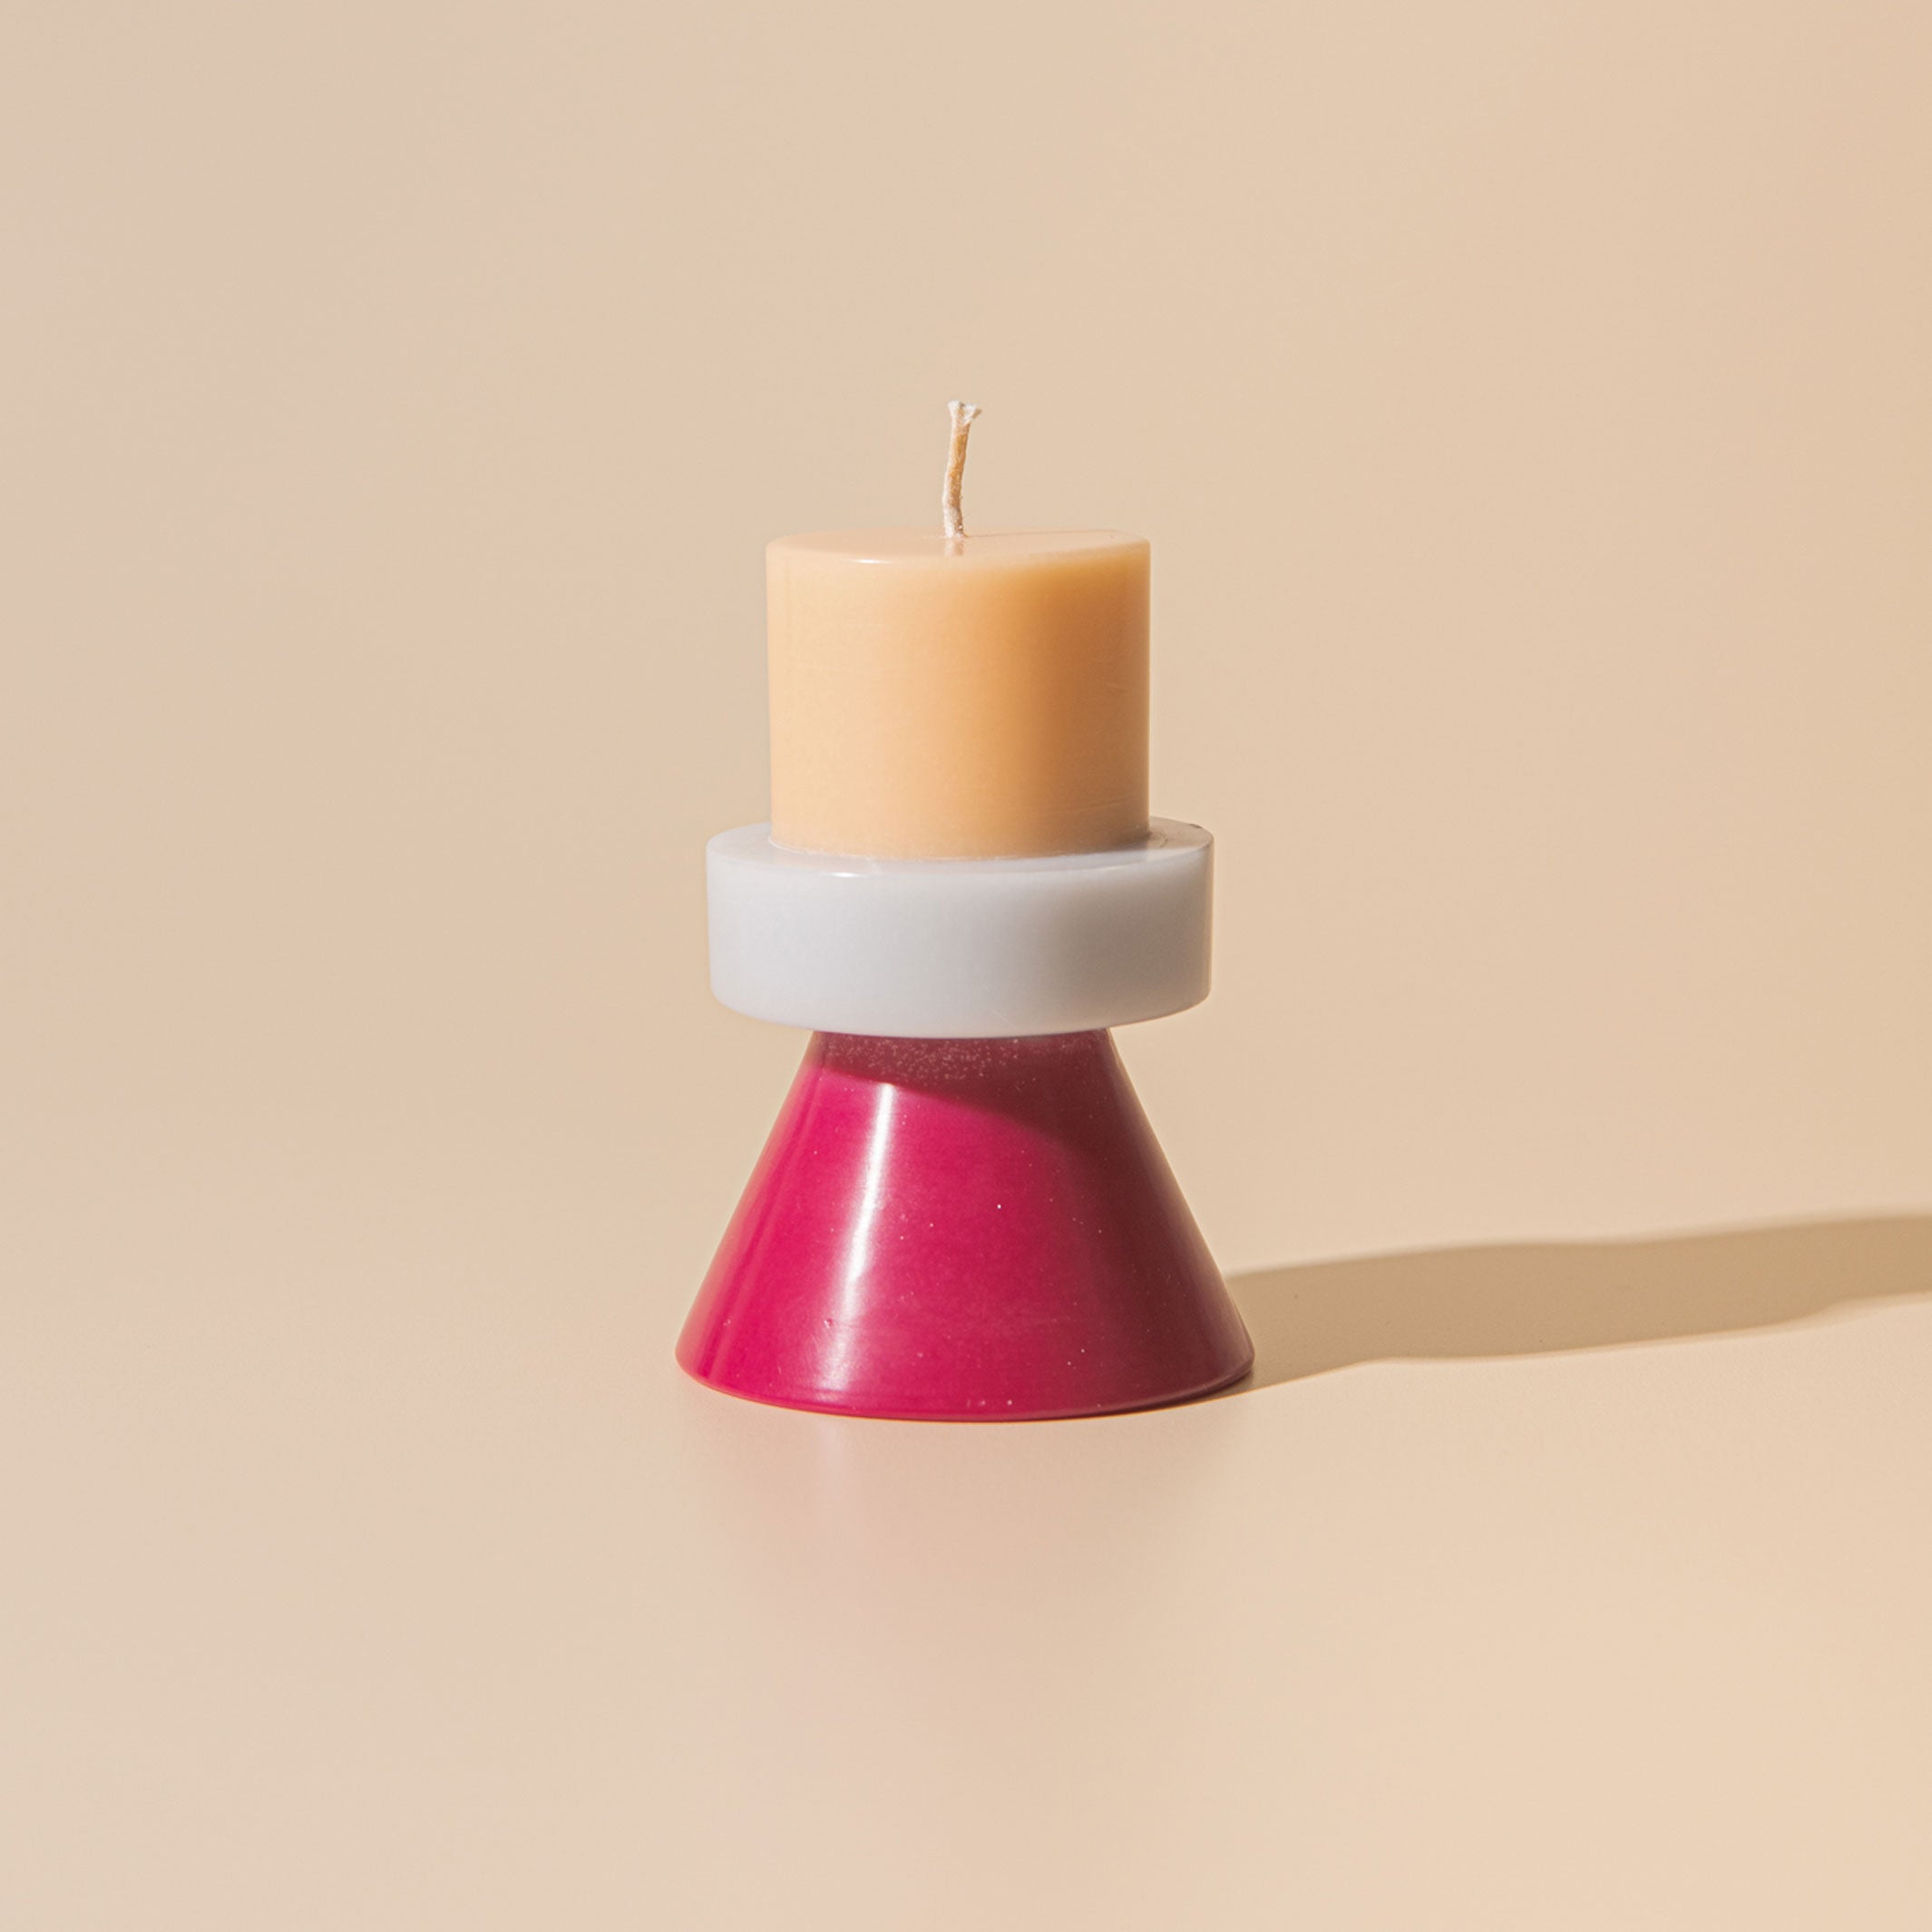 STACK CANDLE MINI | KERZE in Farben peach-lilac-ruby | 20 Std. Brenndauer | YOD AND CO